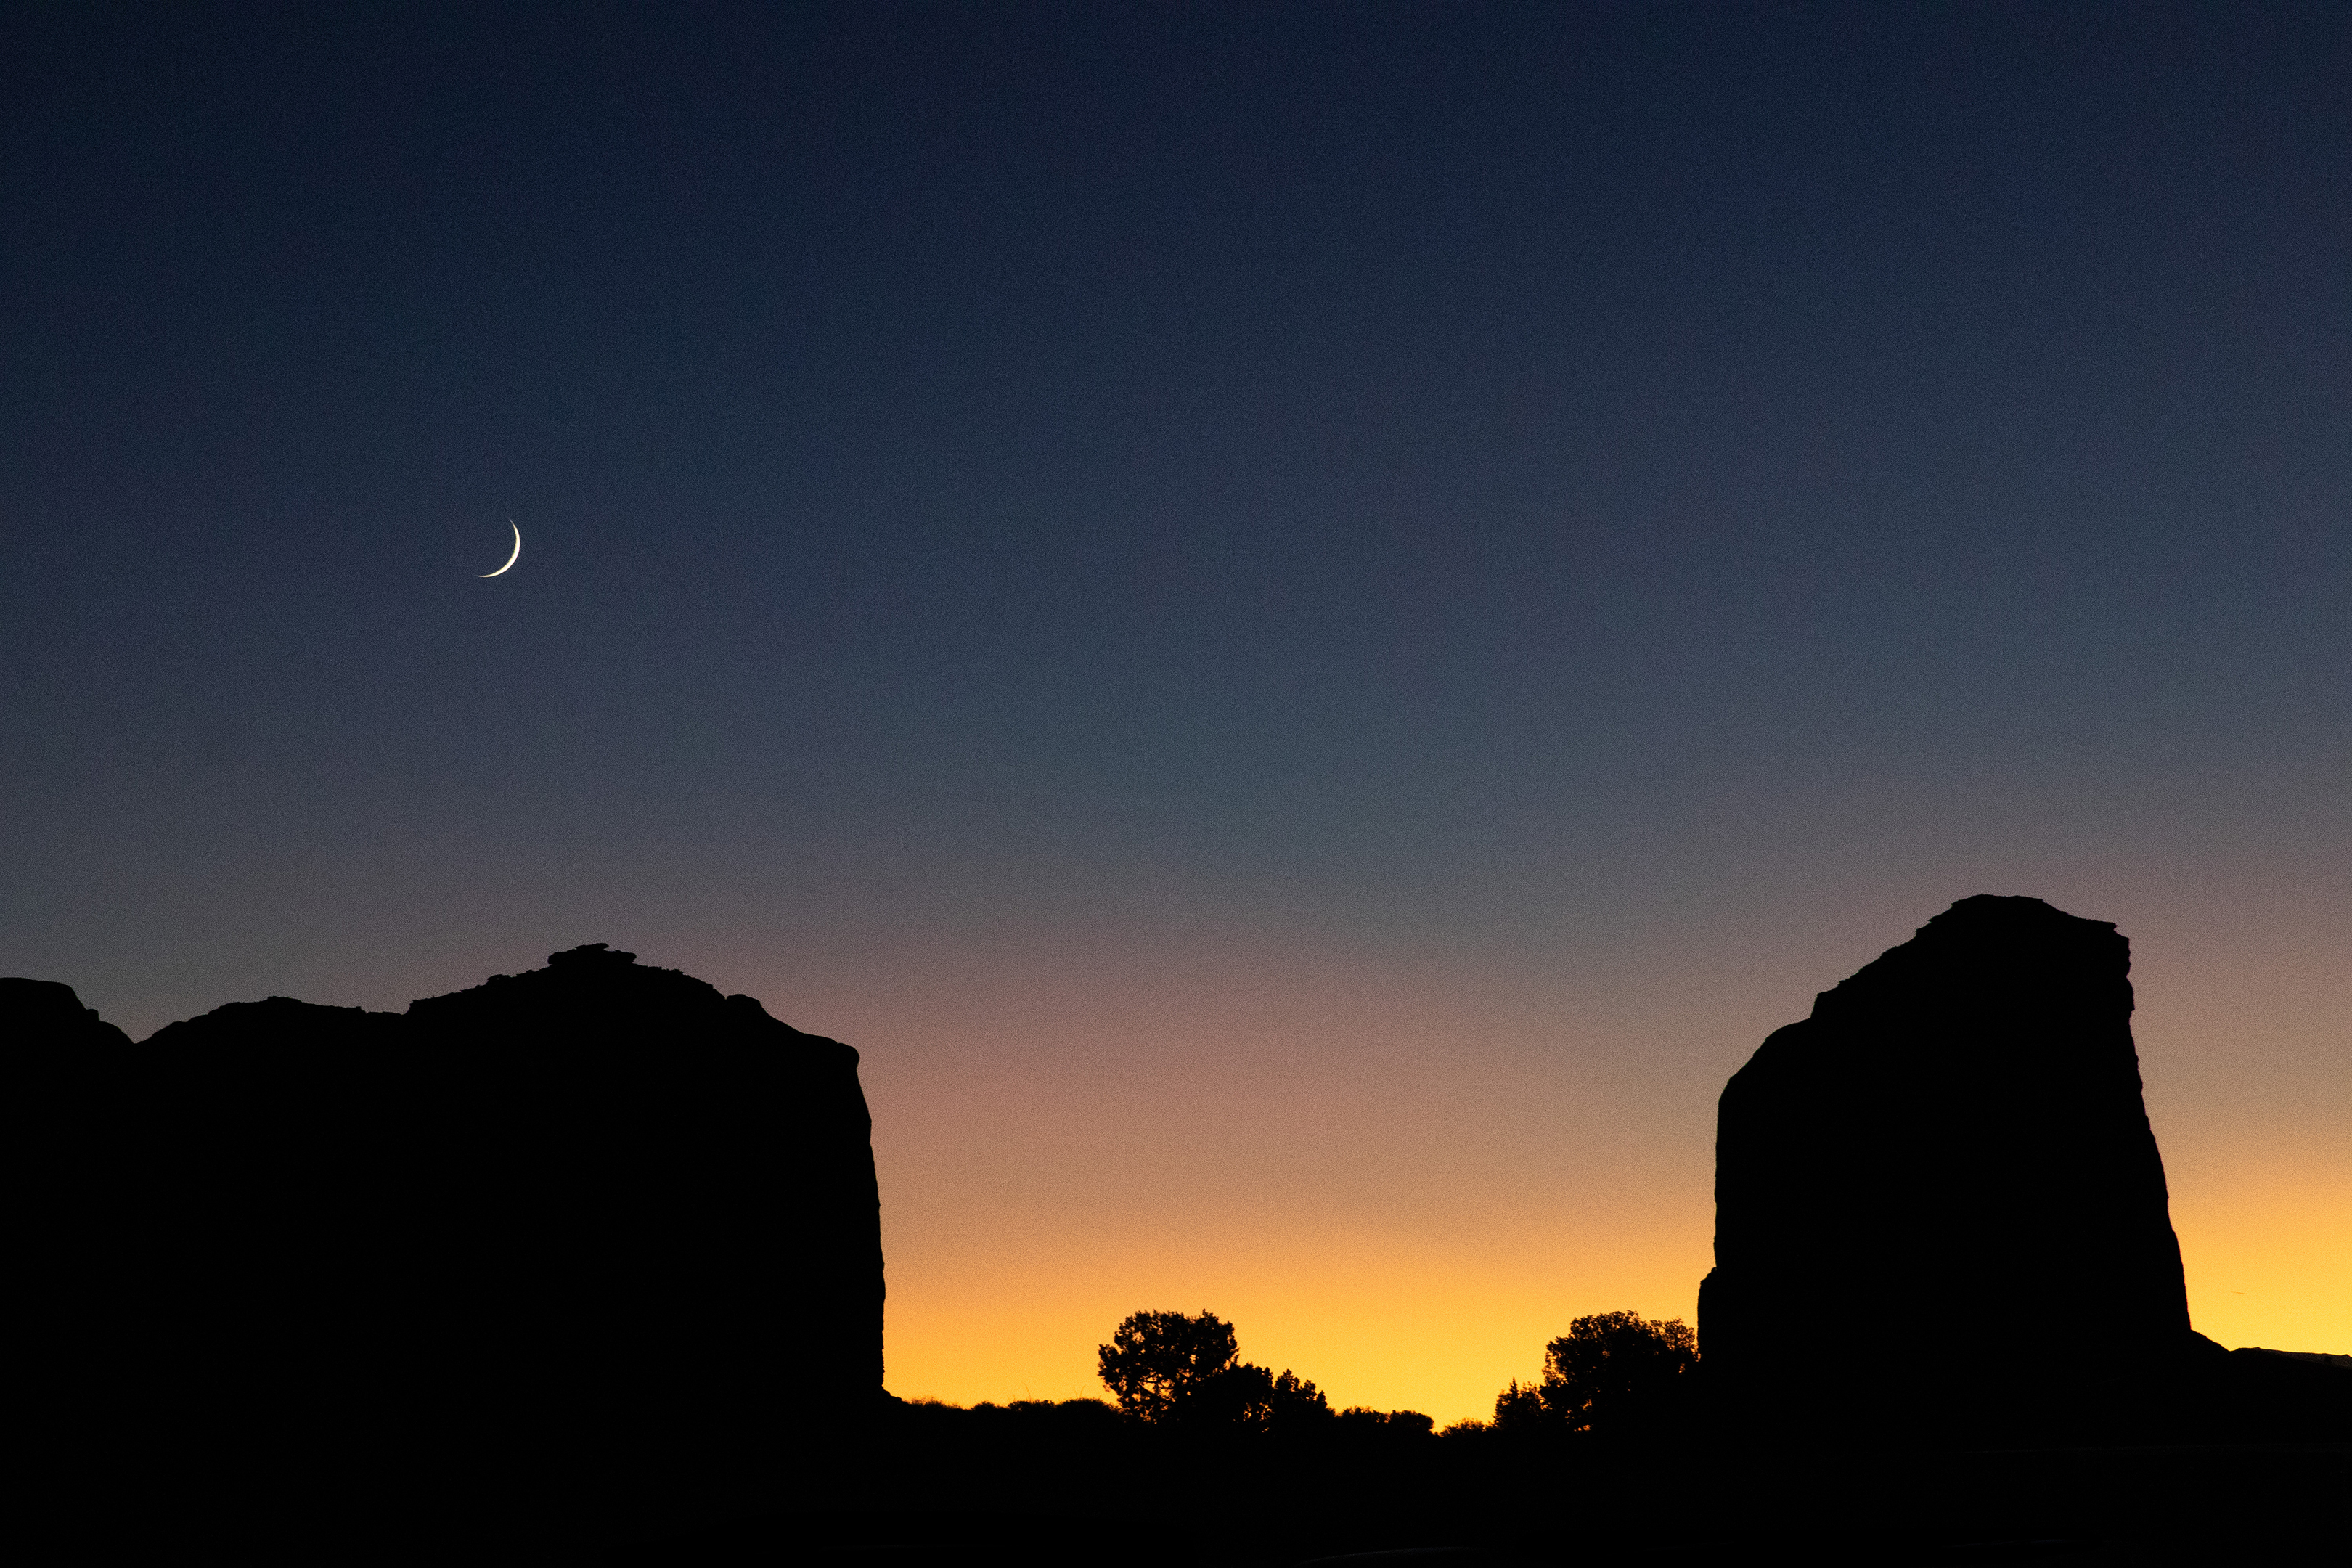 Photo by Valentina DeClaire  |  Taken just after sunset on Navajo Nation grounds in Monument Valley. I waited until the crescent moon was bright enough, while the colors of the sunset still sparkled on the horizon.